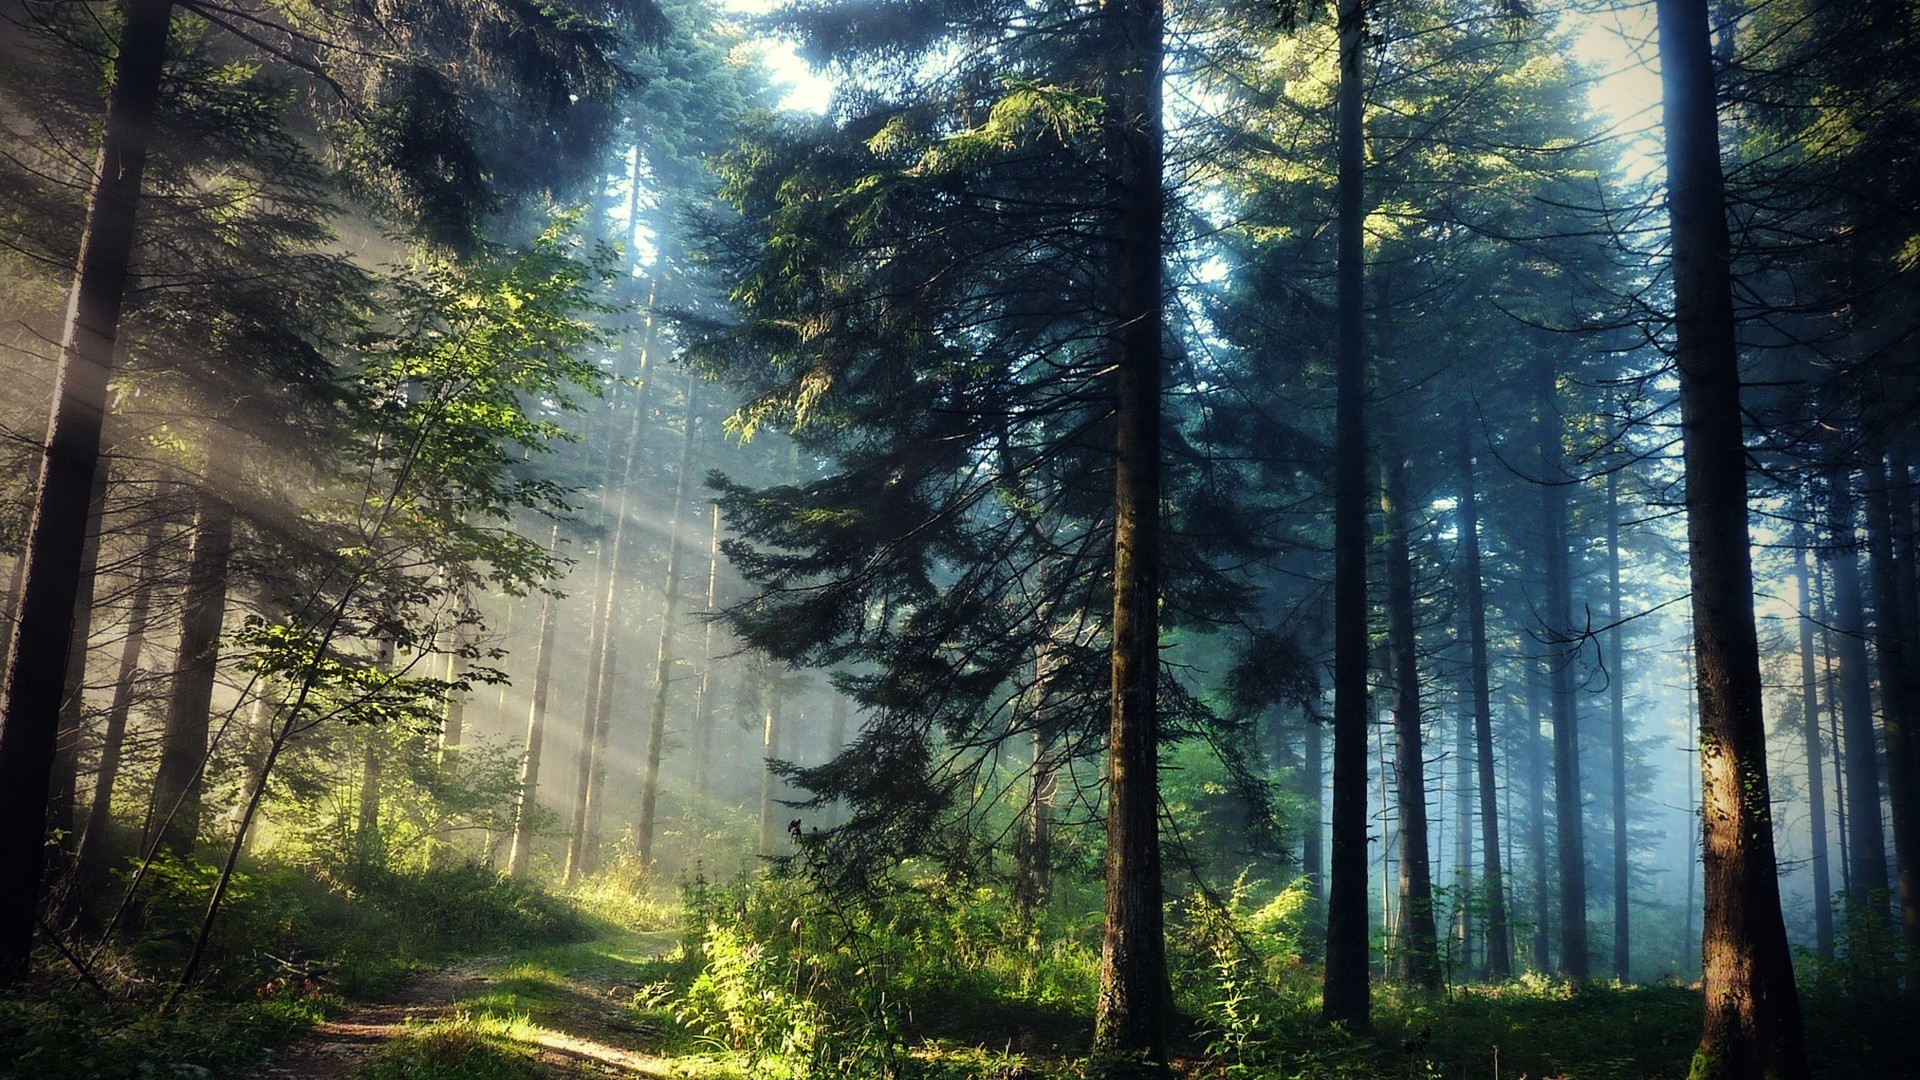 General 1920x1080 forest trees landscape sun rays nature outdoors plants sunlight